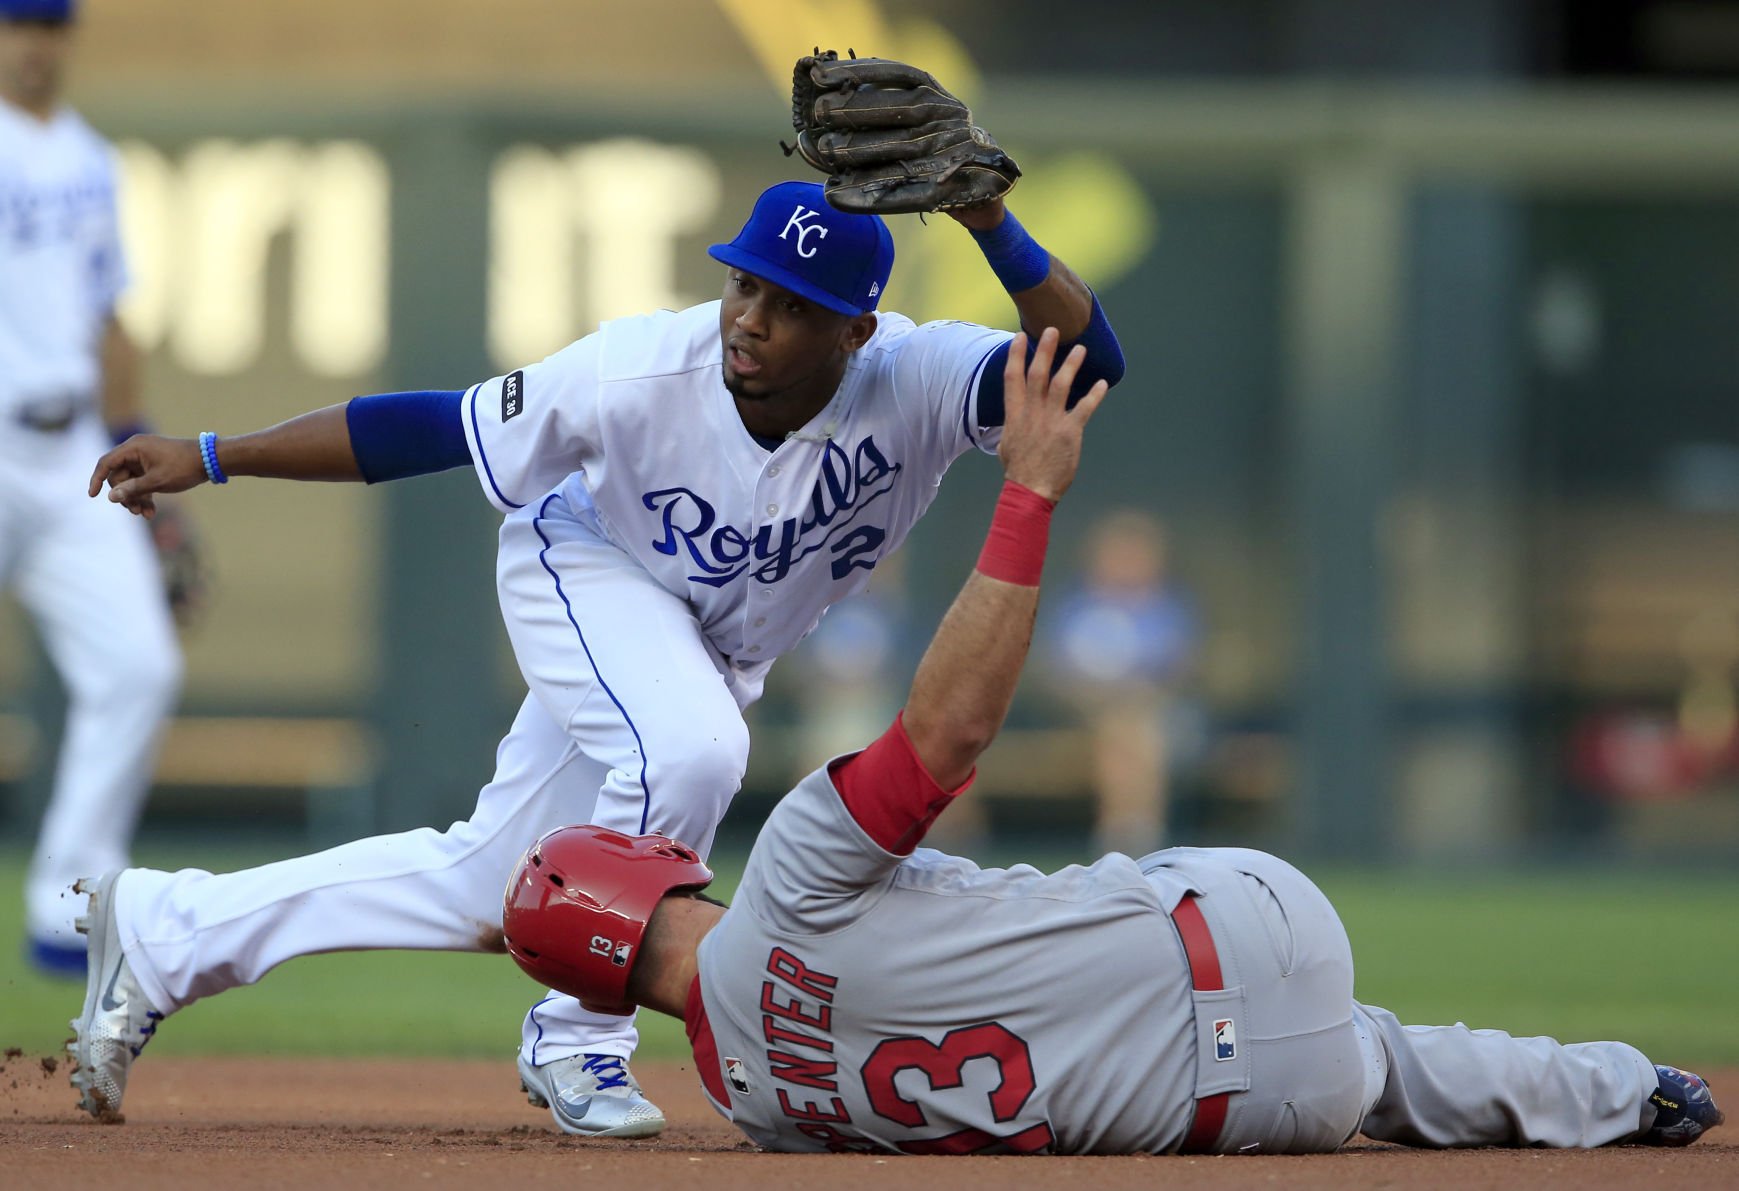 Where to find Tuesdays Cards-Royals telecast